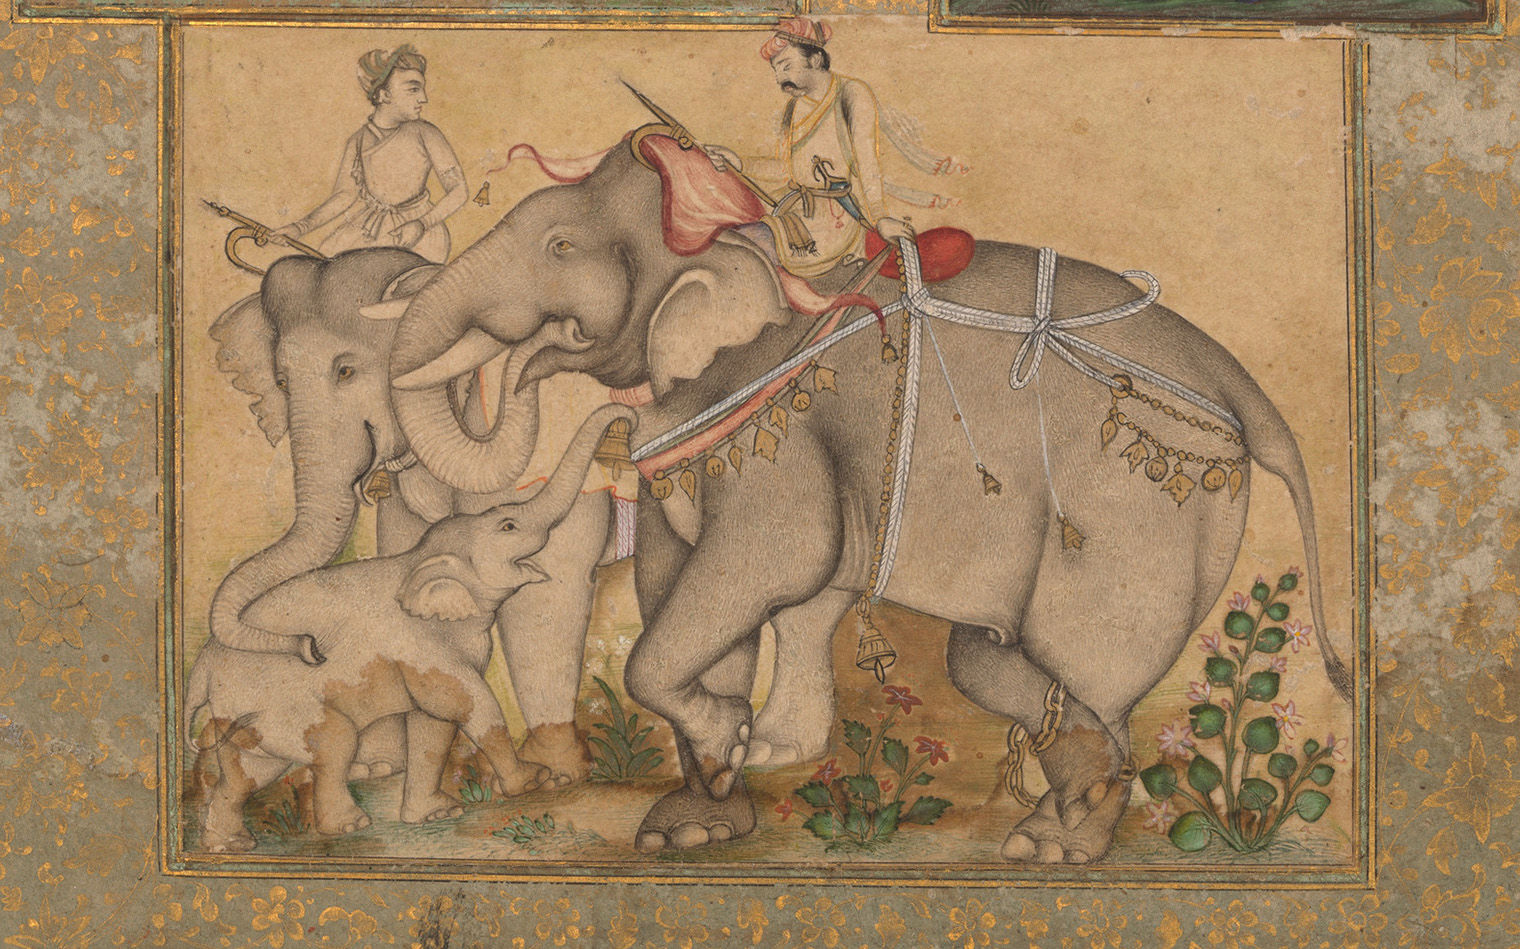 A light shaded gathering of elephtants, with a man and woman riding on the backs of the elephants. 